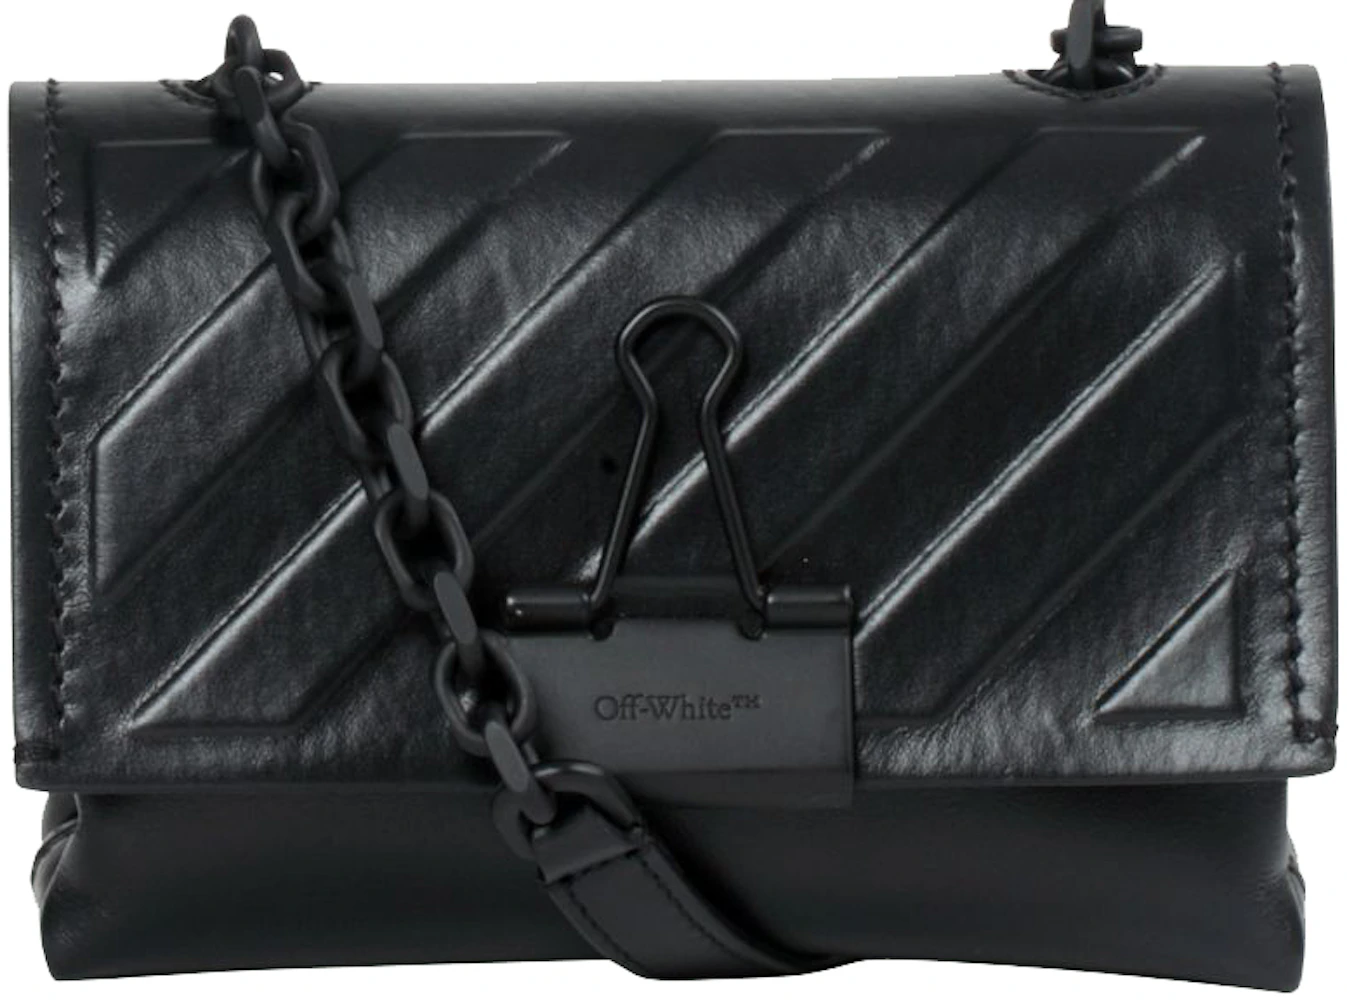 OFF-WHITE Binder Clip Bag SS22 Mini Diag Stripe White Black Yellow in  Leather with Silver-tone - US